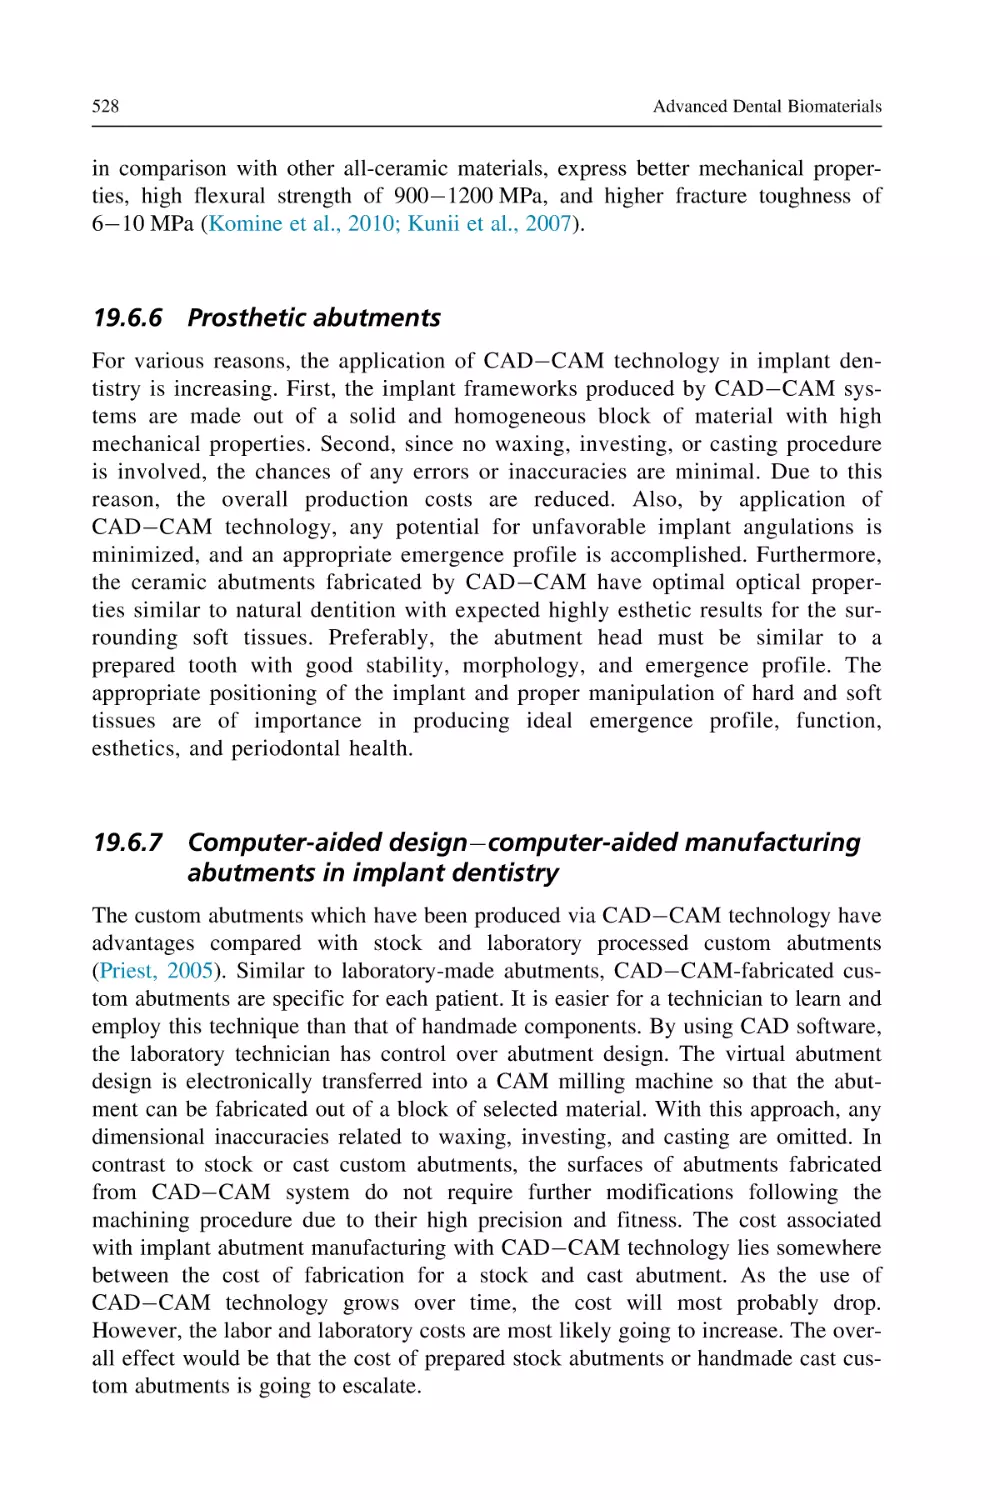 19.6.6 Prosthetic abutments
19.6.7 Computer-aided design–computer-aided manufacturing abutments in implant dentistry